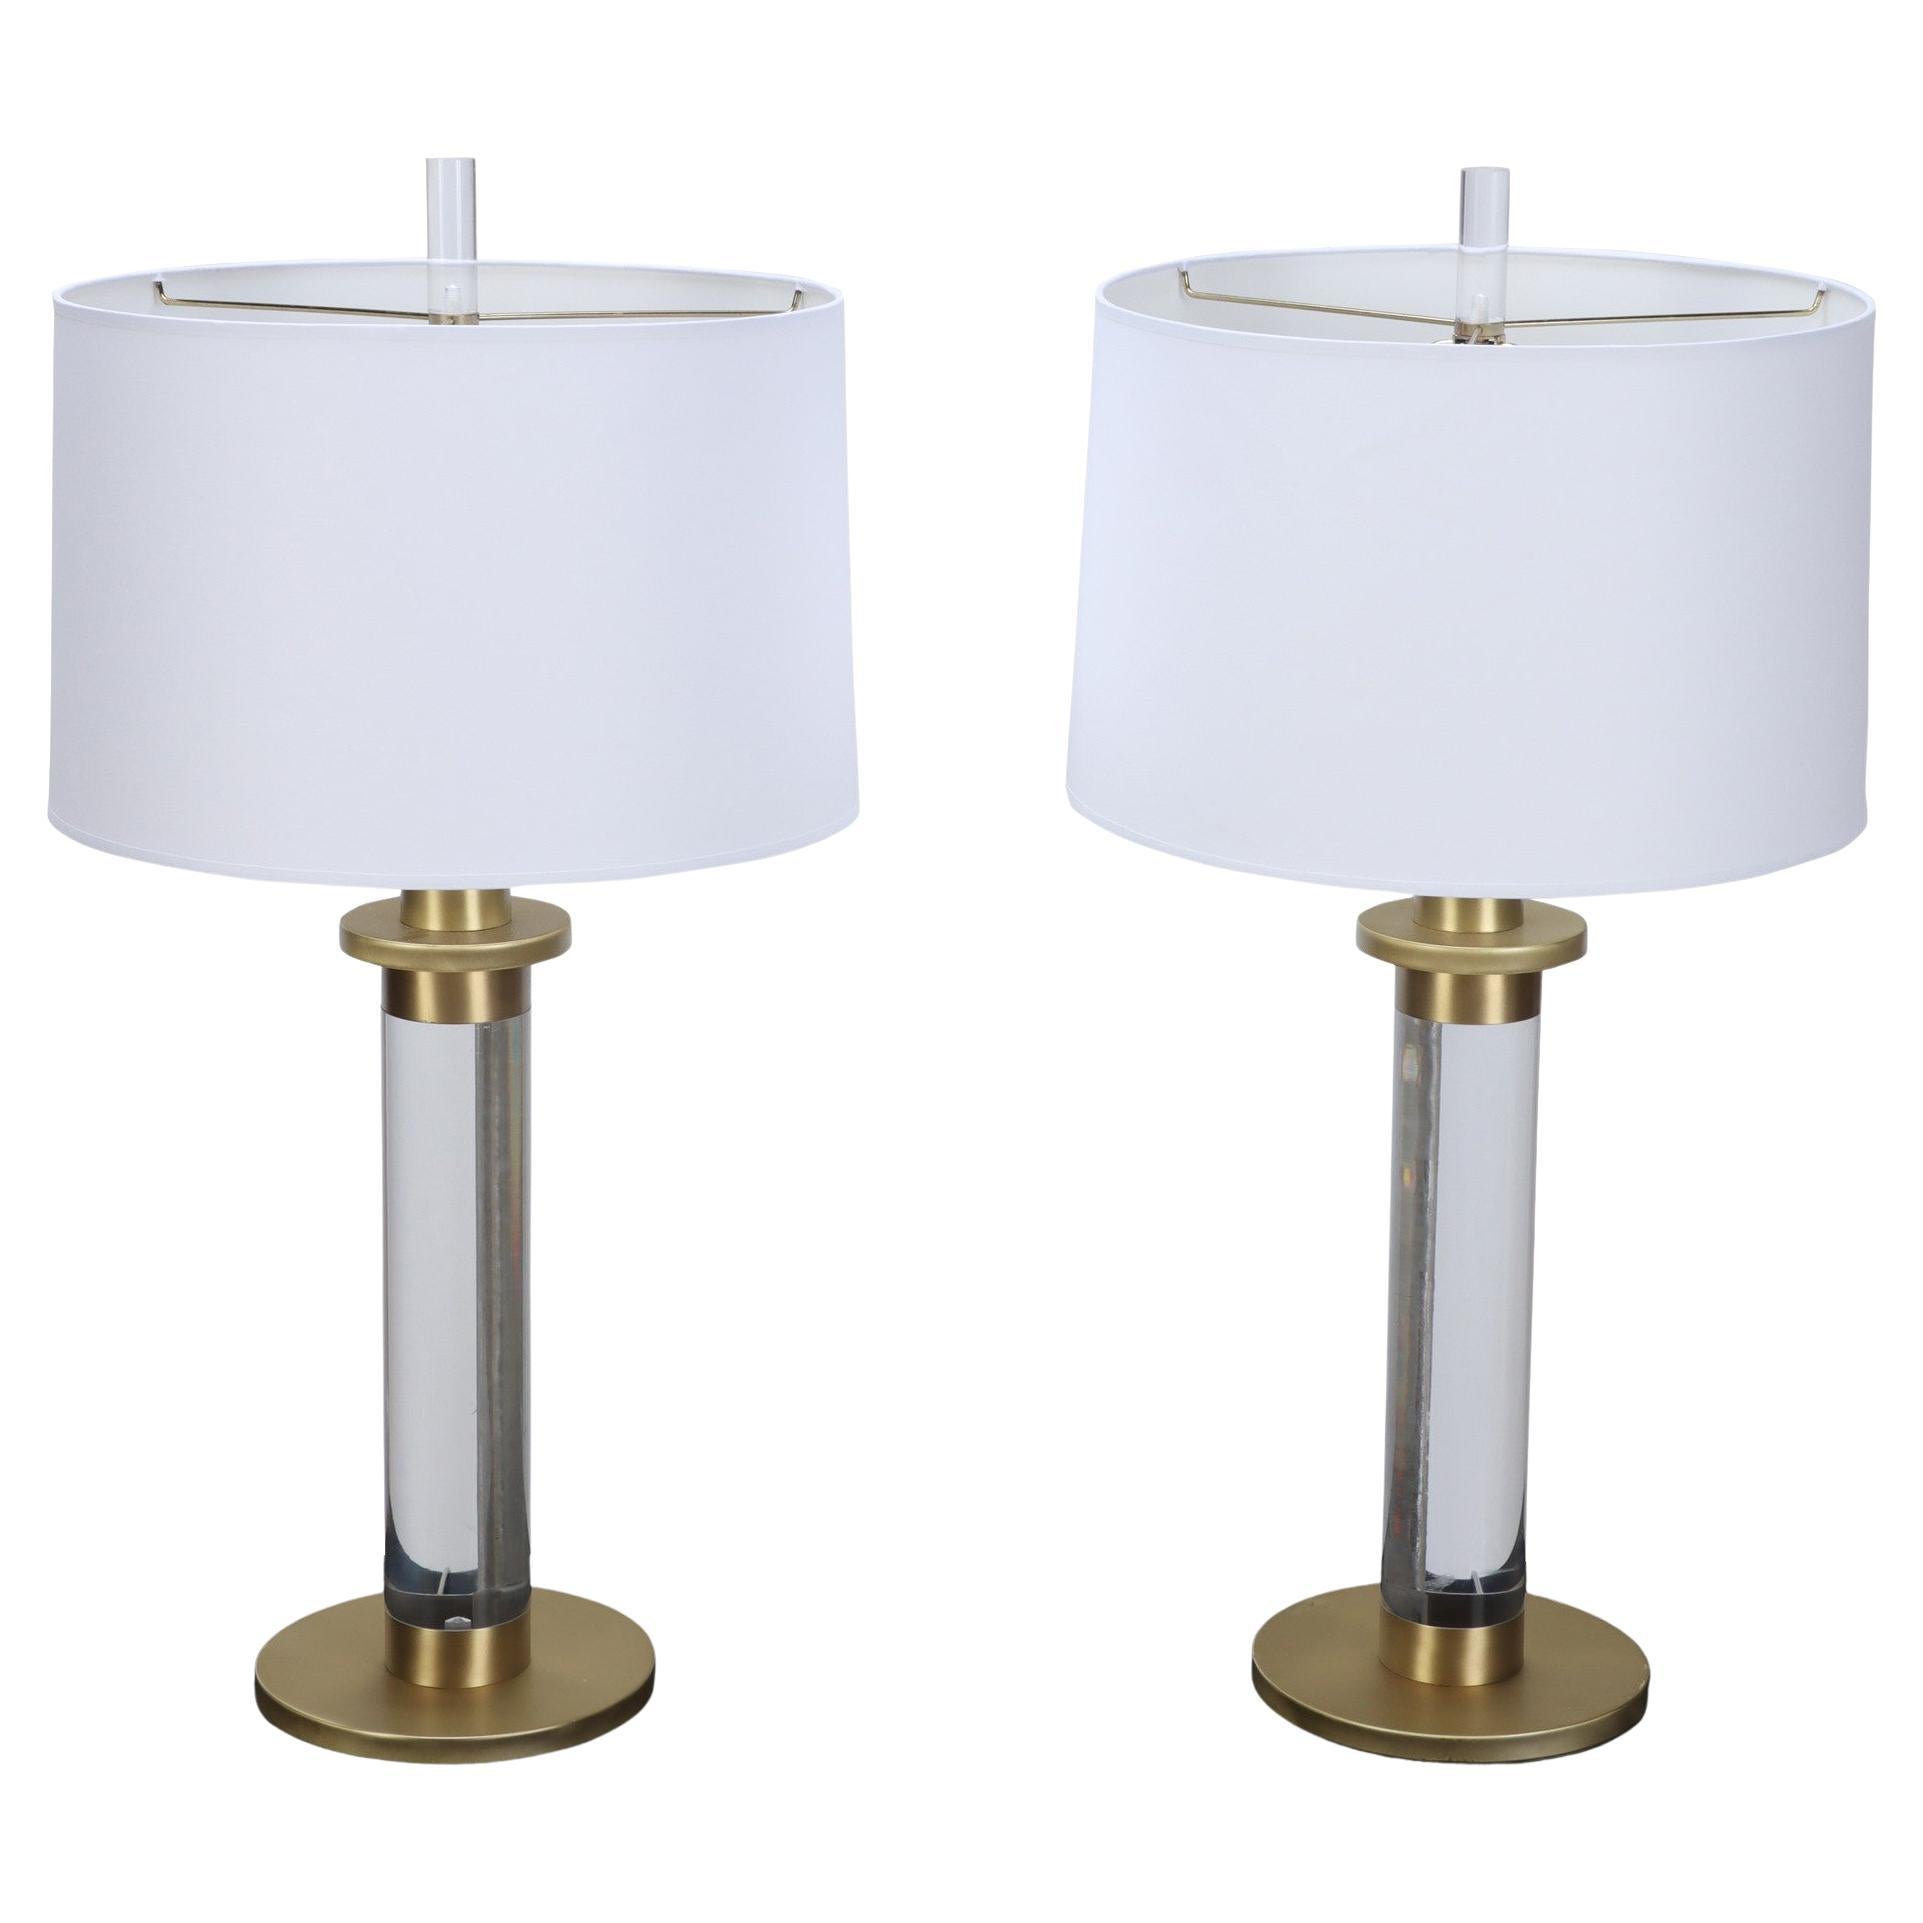 Pair of Modern Lucite Brass Column Table Lamps, circa 1950 For Sale